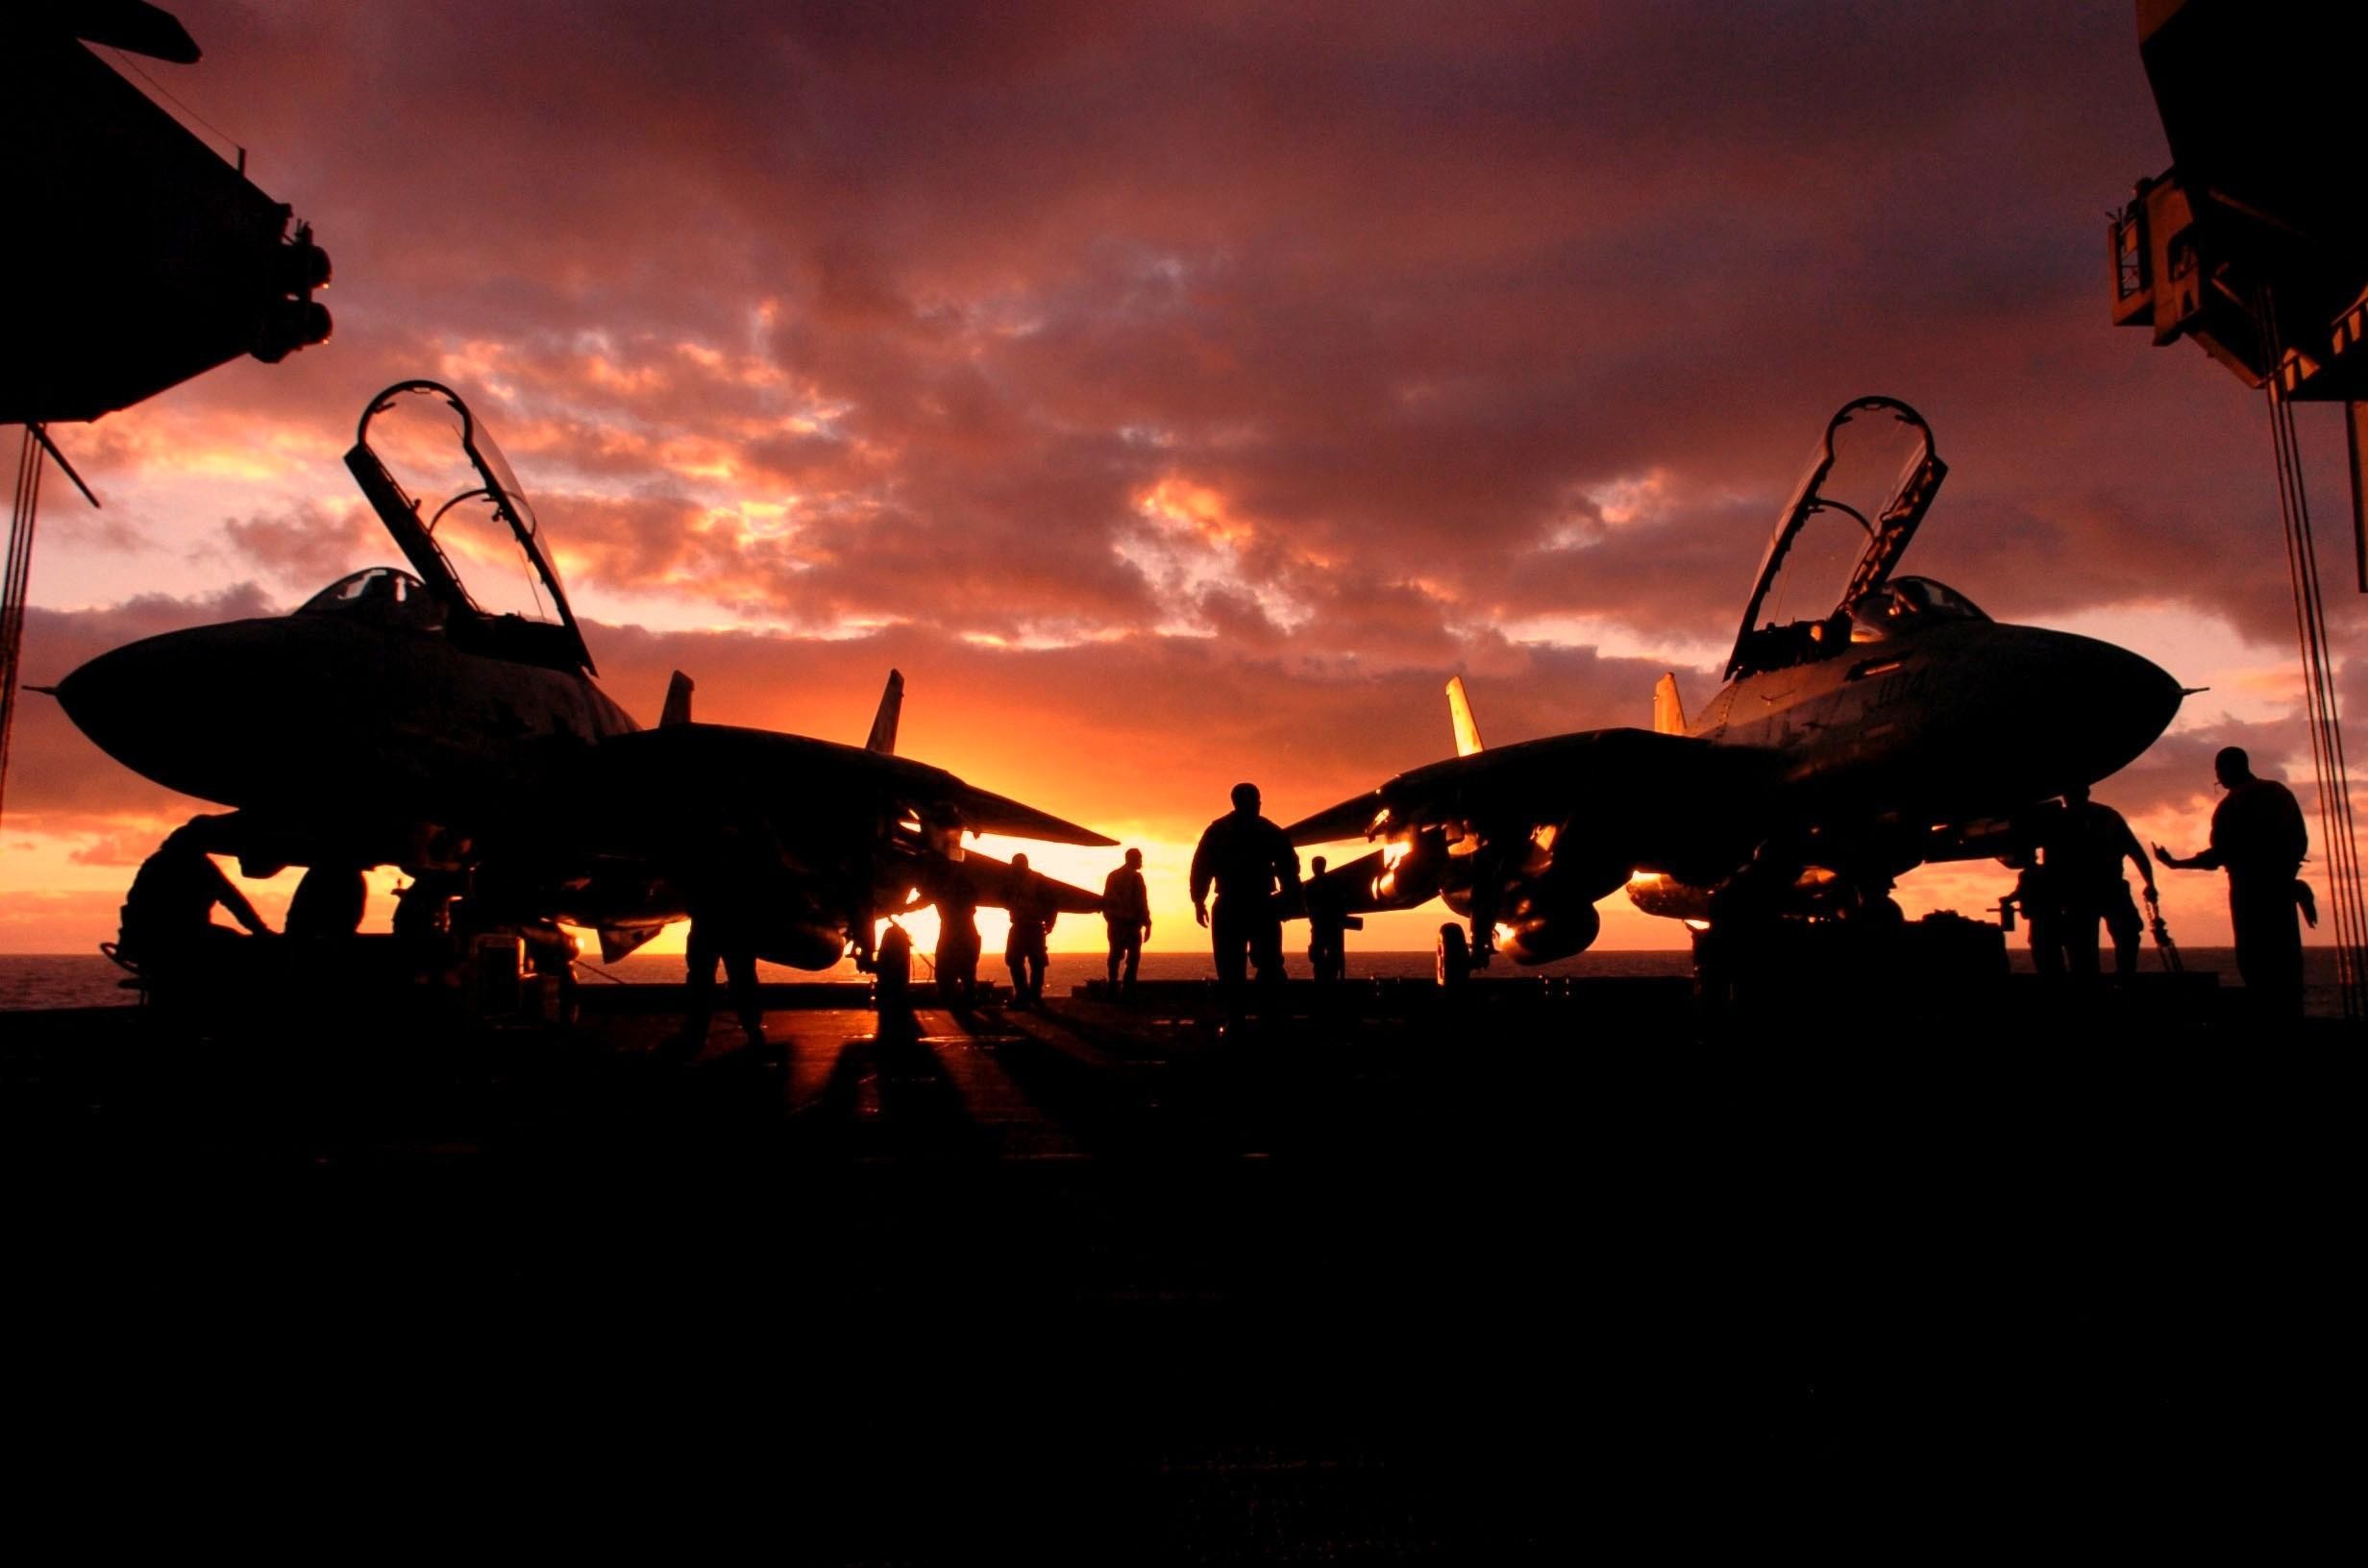 2464x1632 Related: Air force wallpapers Â· HD navy 1 DD-SP-01-00006 HD navy ...